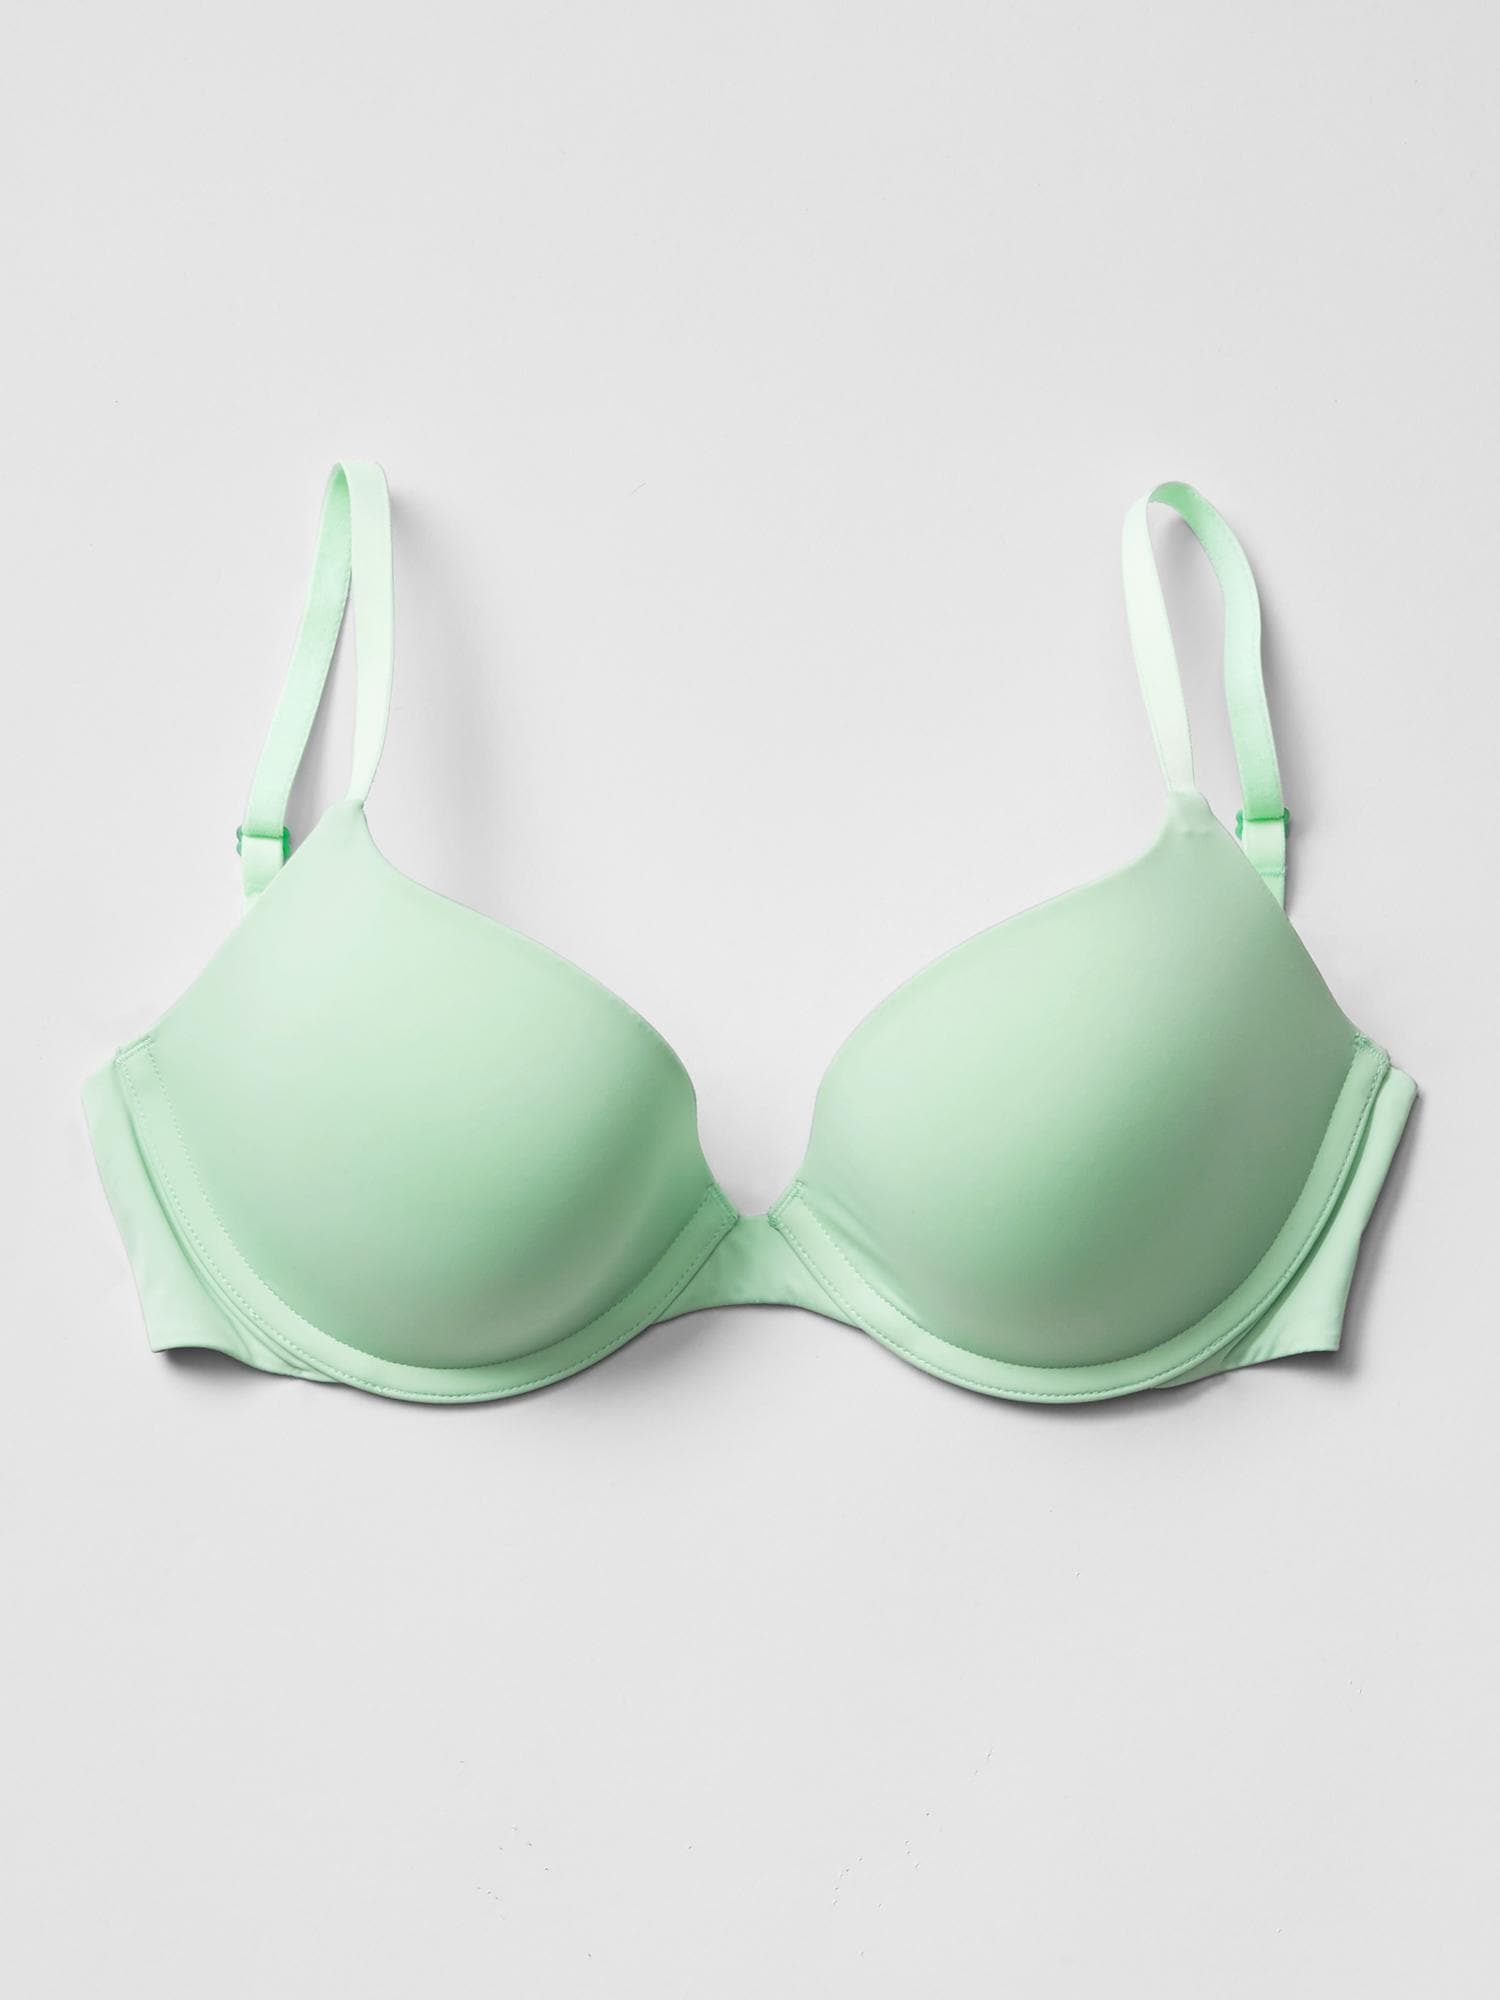 SheIn Olive Green Push-up Bra Size M - $10 (50% Off Retail) - From